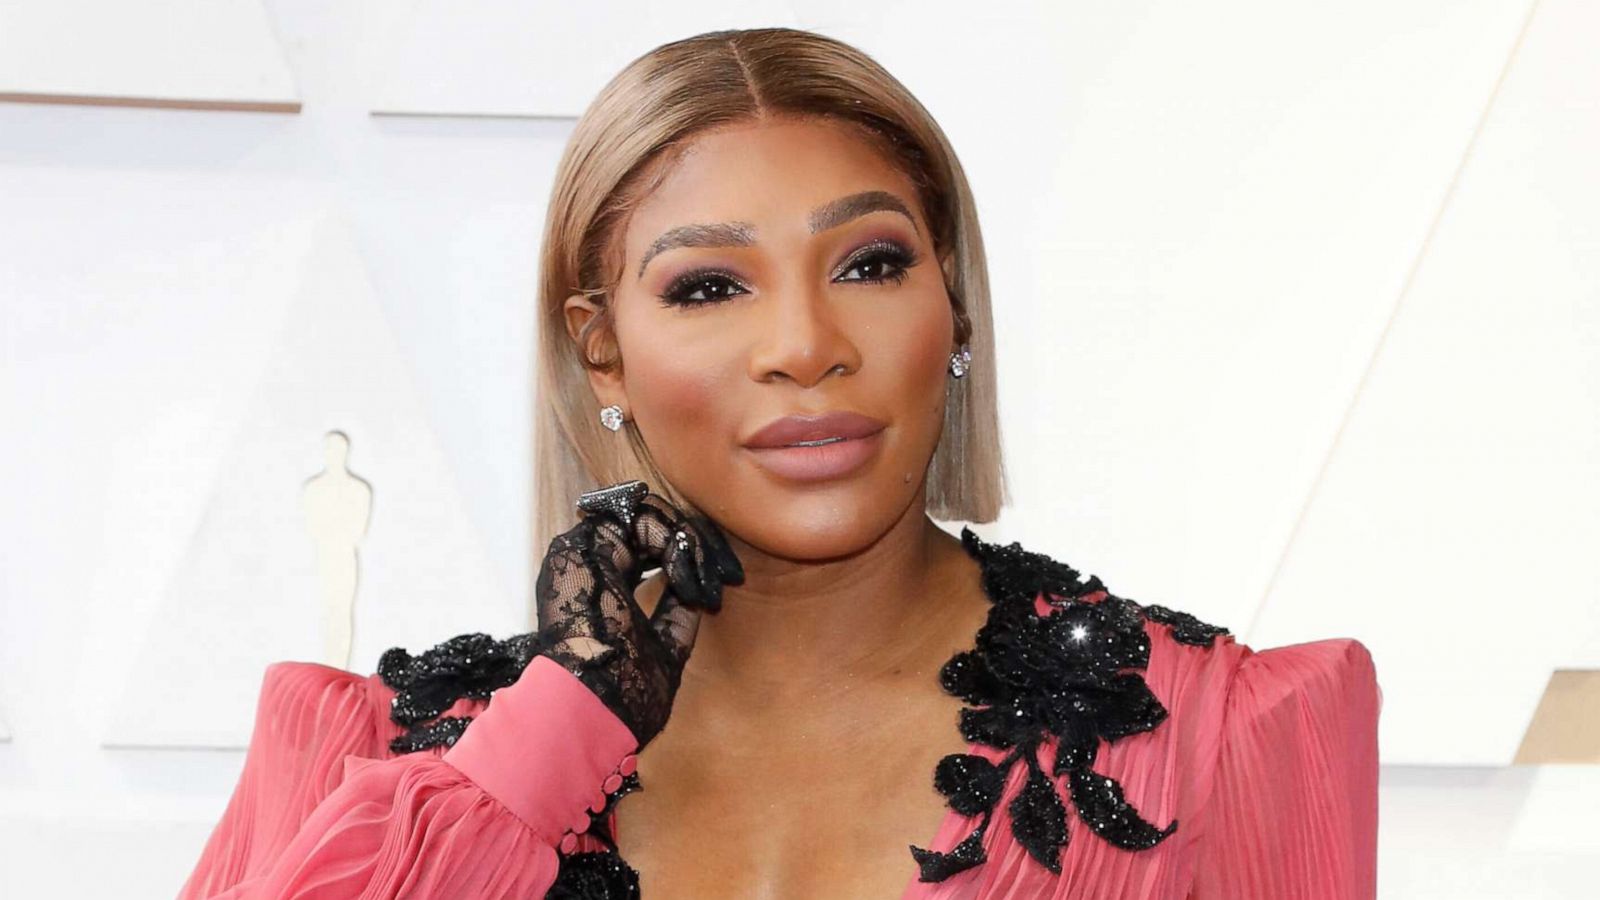 Rod on X: The other day someone posted a badly lit still of Serena  Williams claiming she had bleached her skin and gotten surgery and must  hate herself. Today Serena posted a